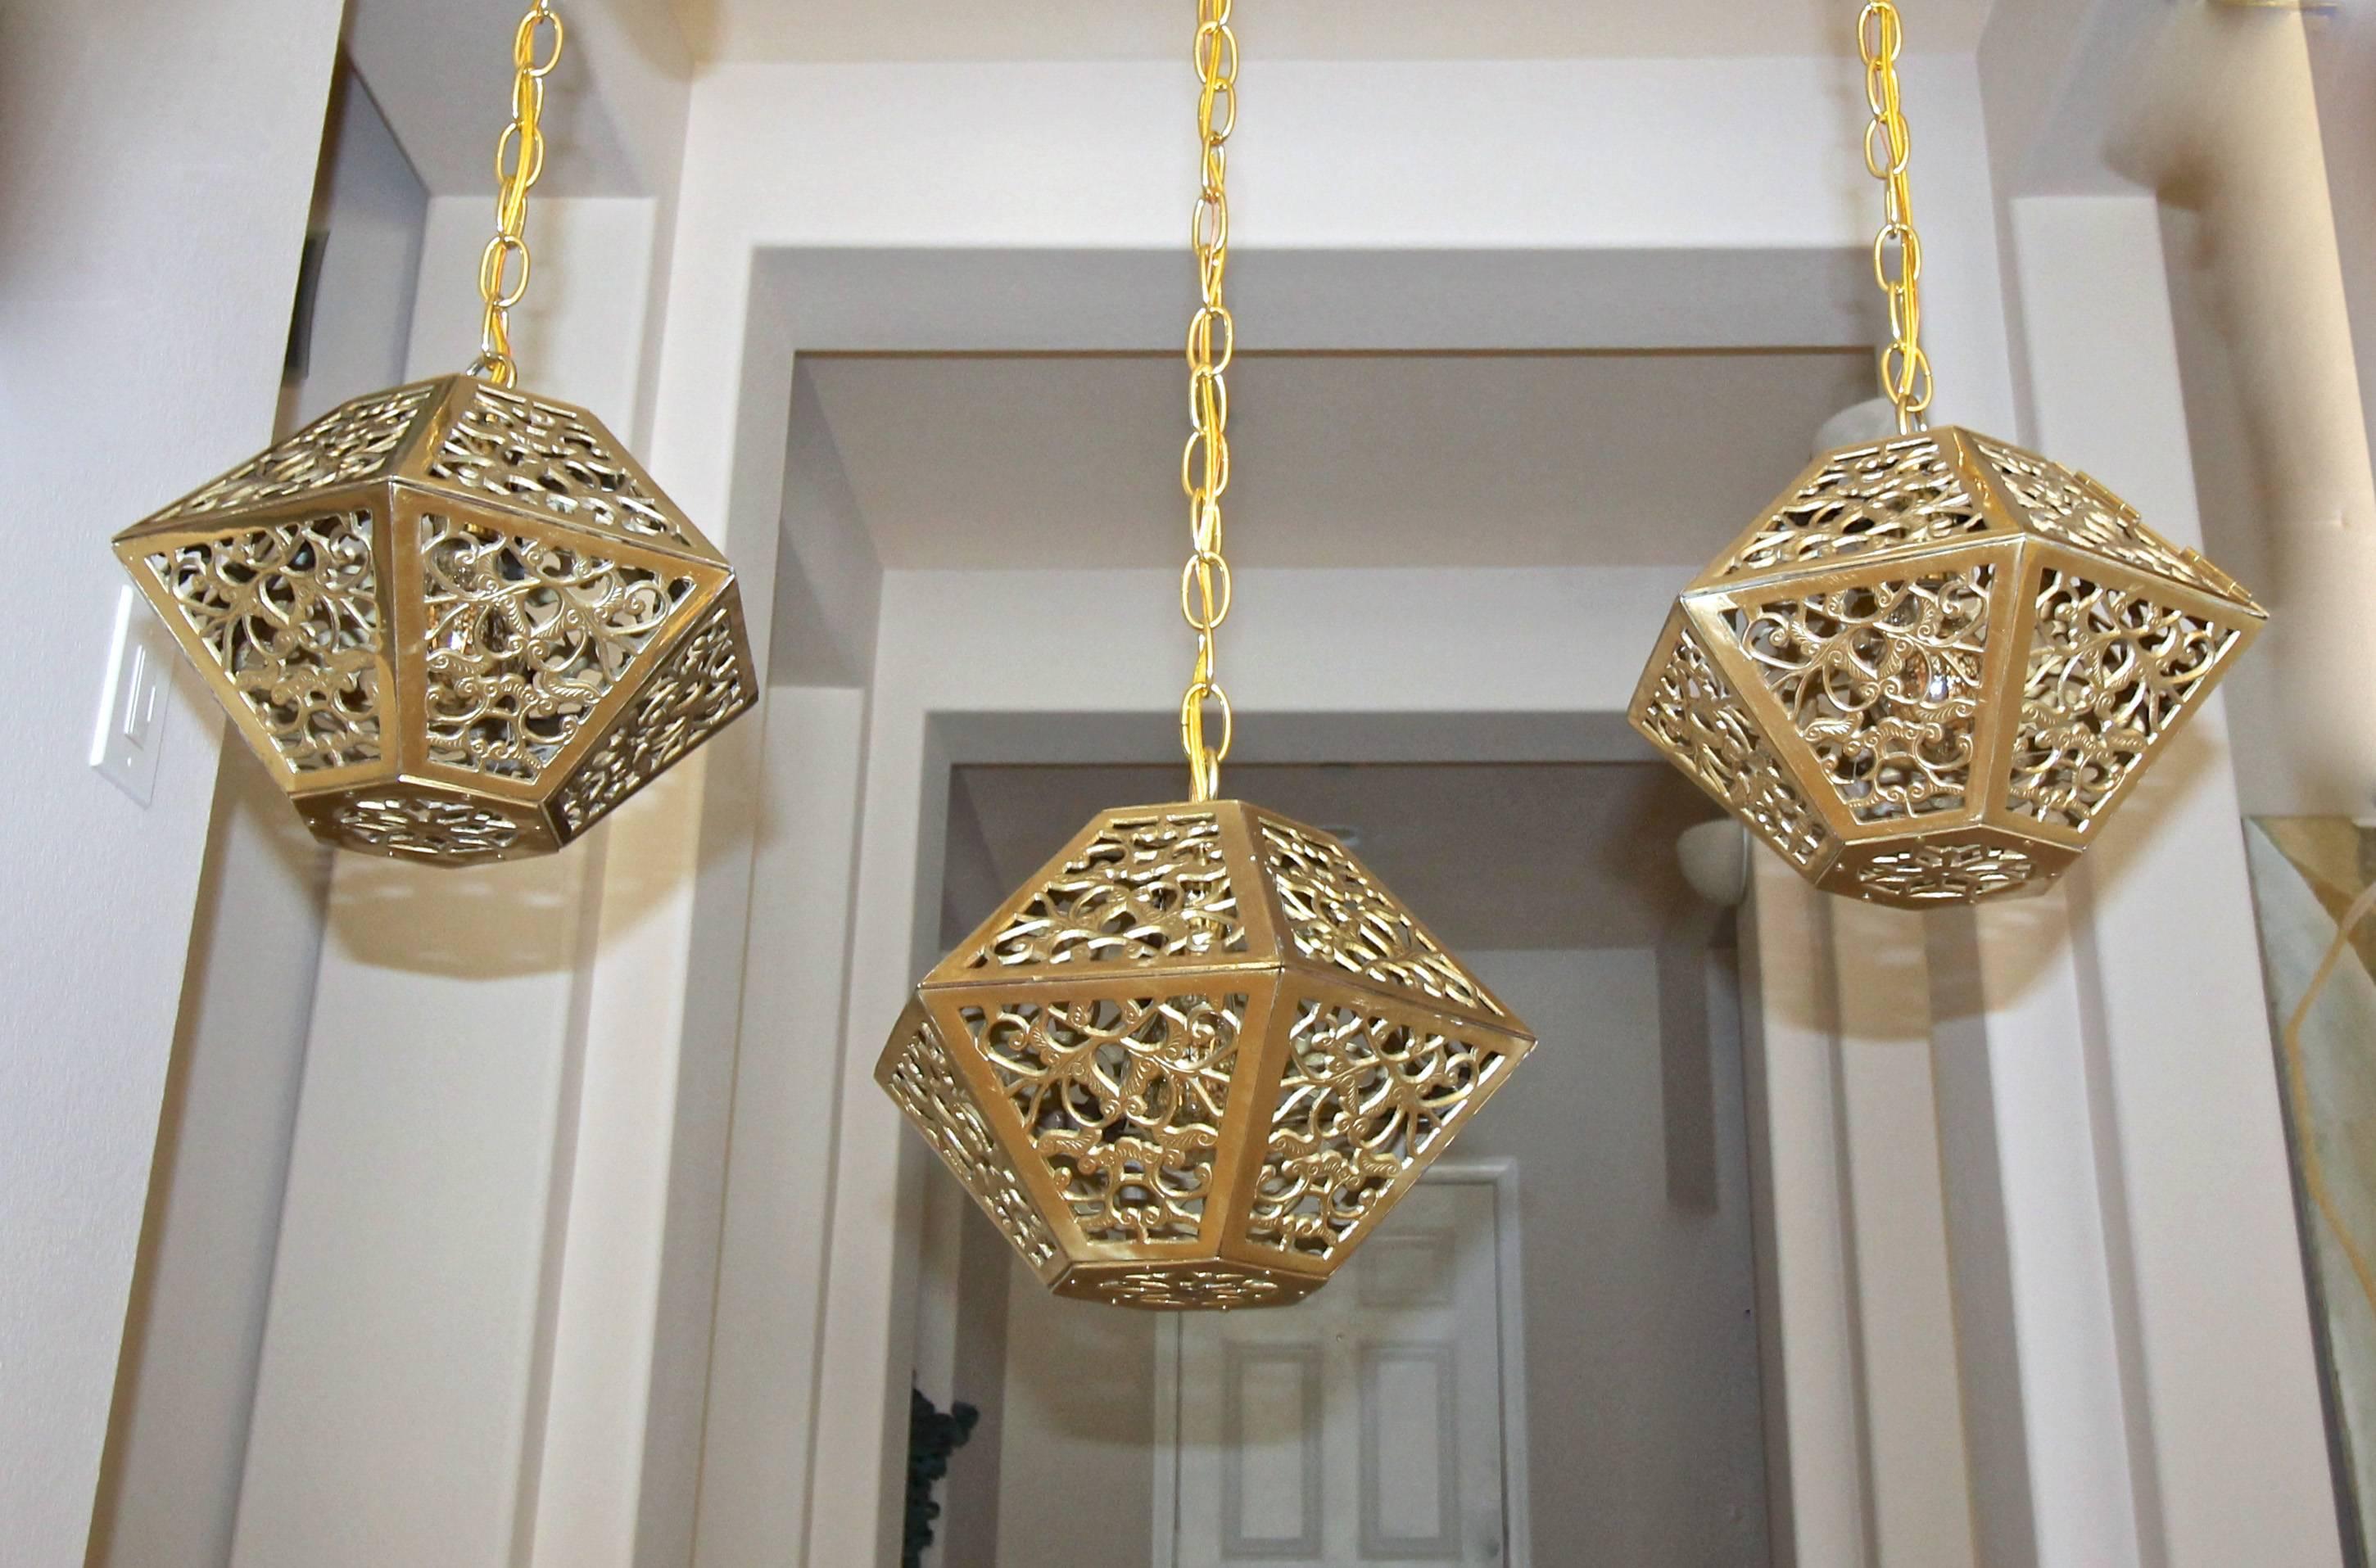 Trio (3) of high quality Asian hexagon shaped pierced brass ceiling pendant lights. This fixture creates a playful pattern on walls and ceilings when lit. Newly wired with new hardware including socket, chain and ceiling cap. Each uses single